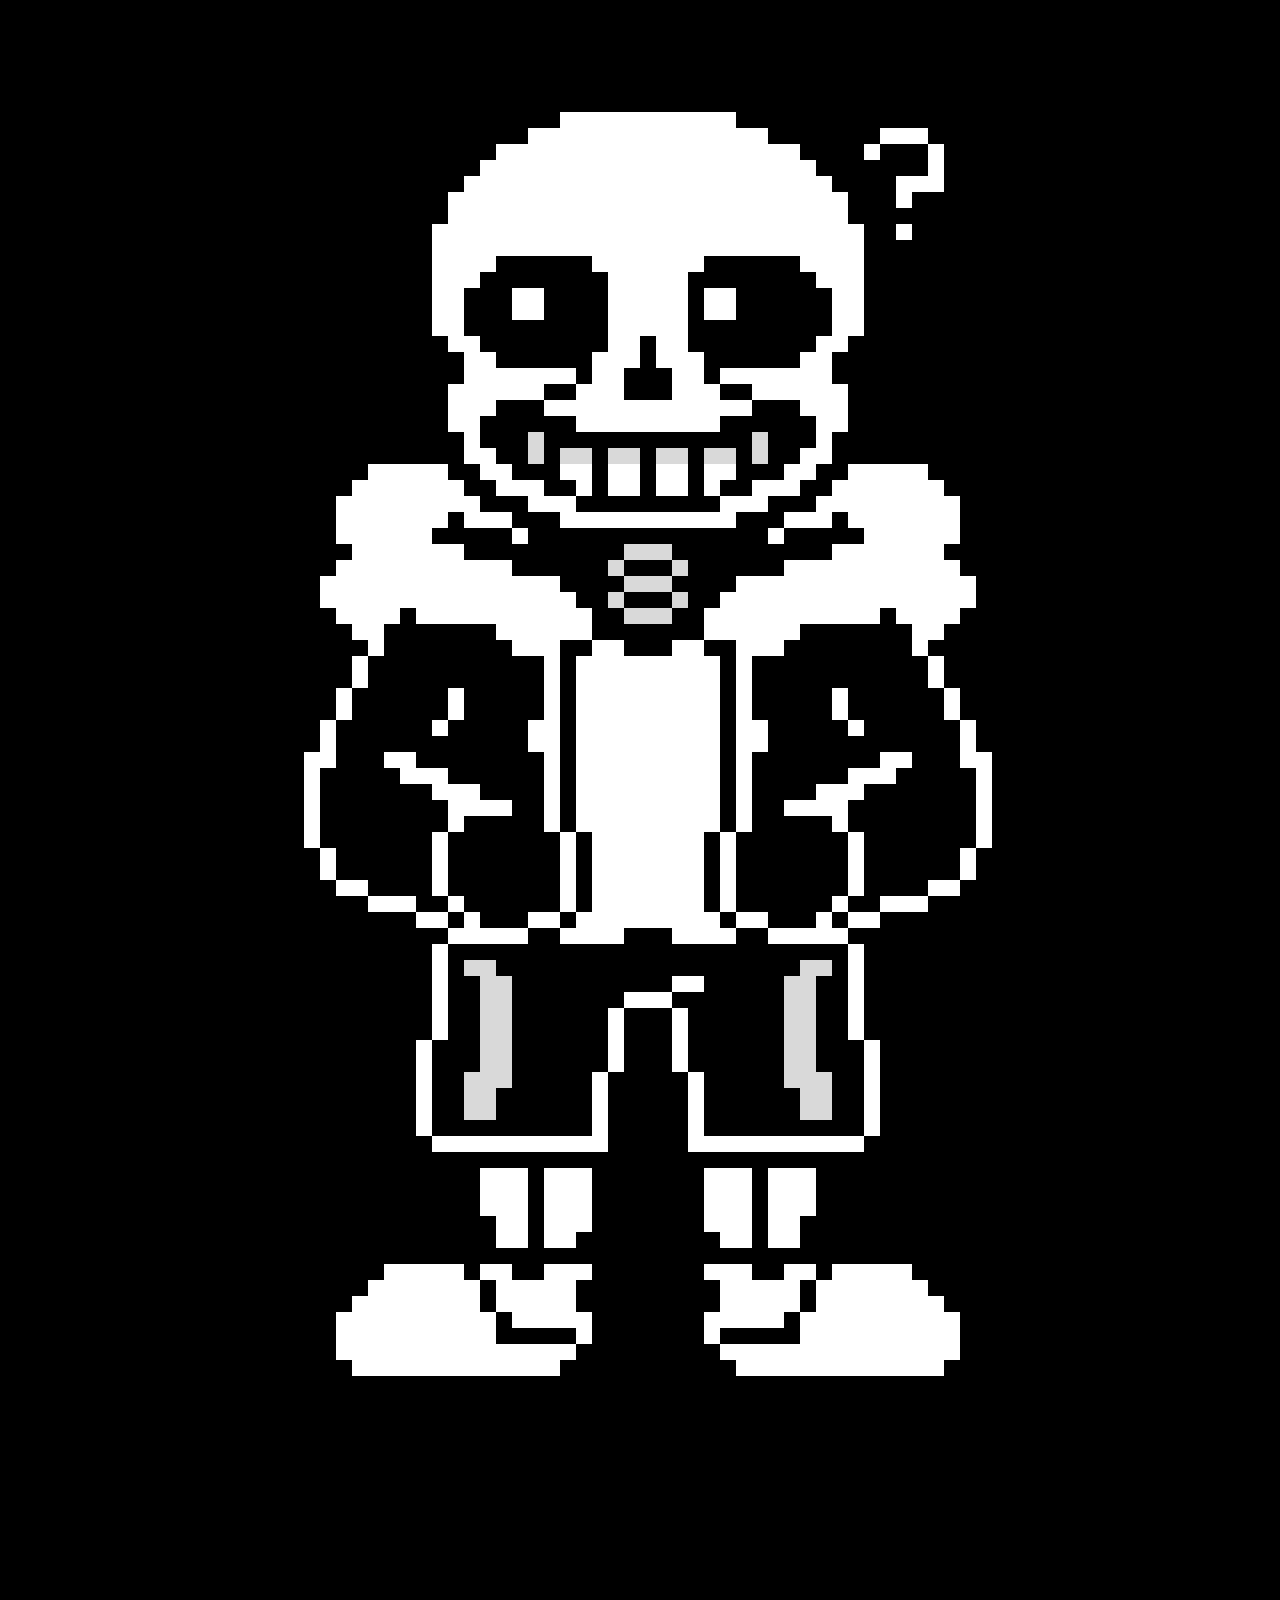 Got any Sans ideas for me? or Minecraft? I’m just out of ideas